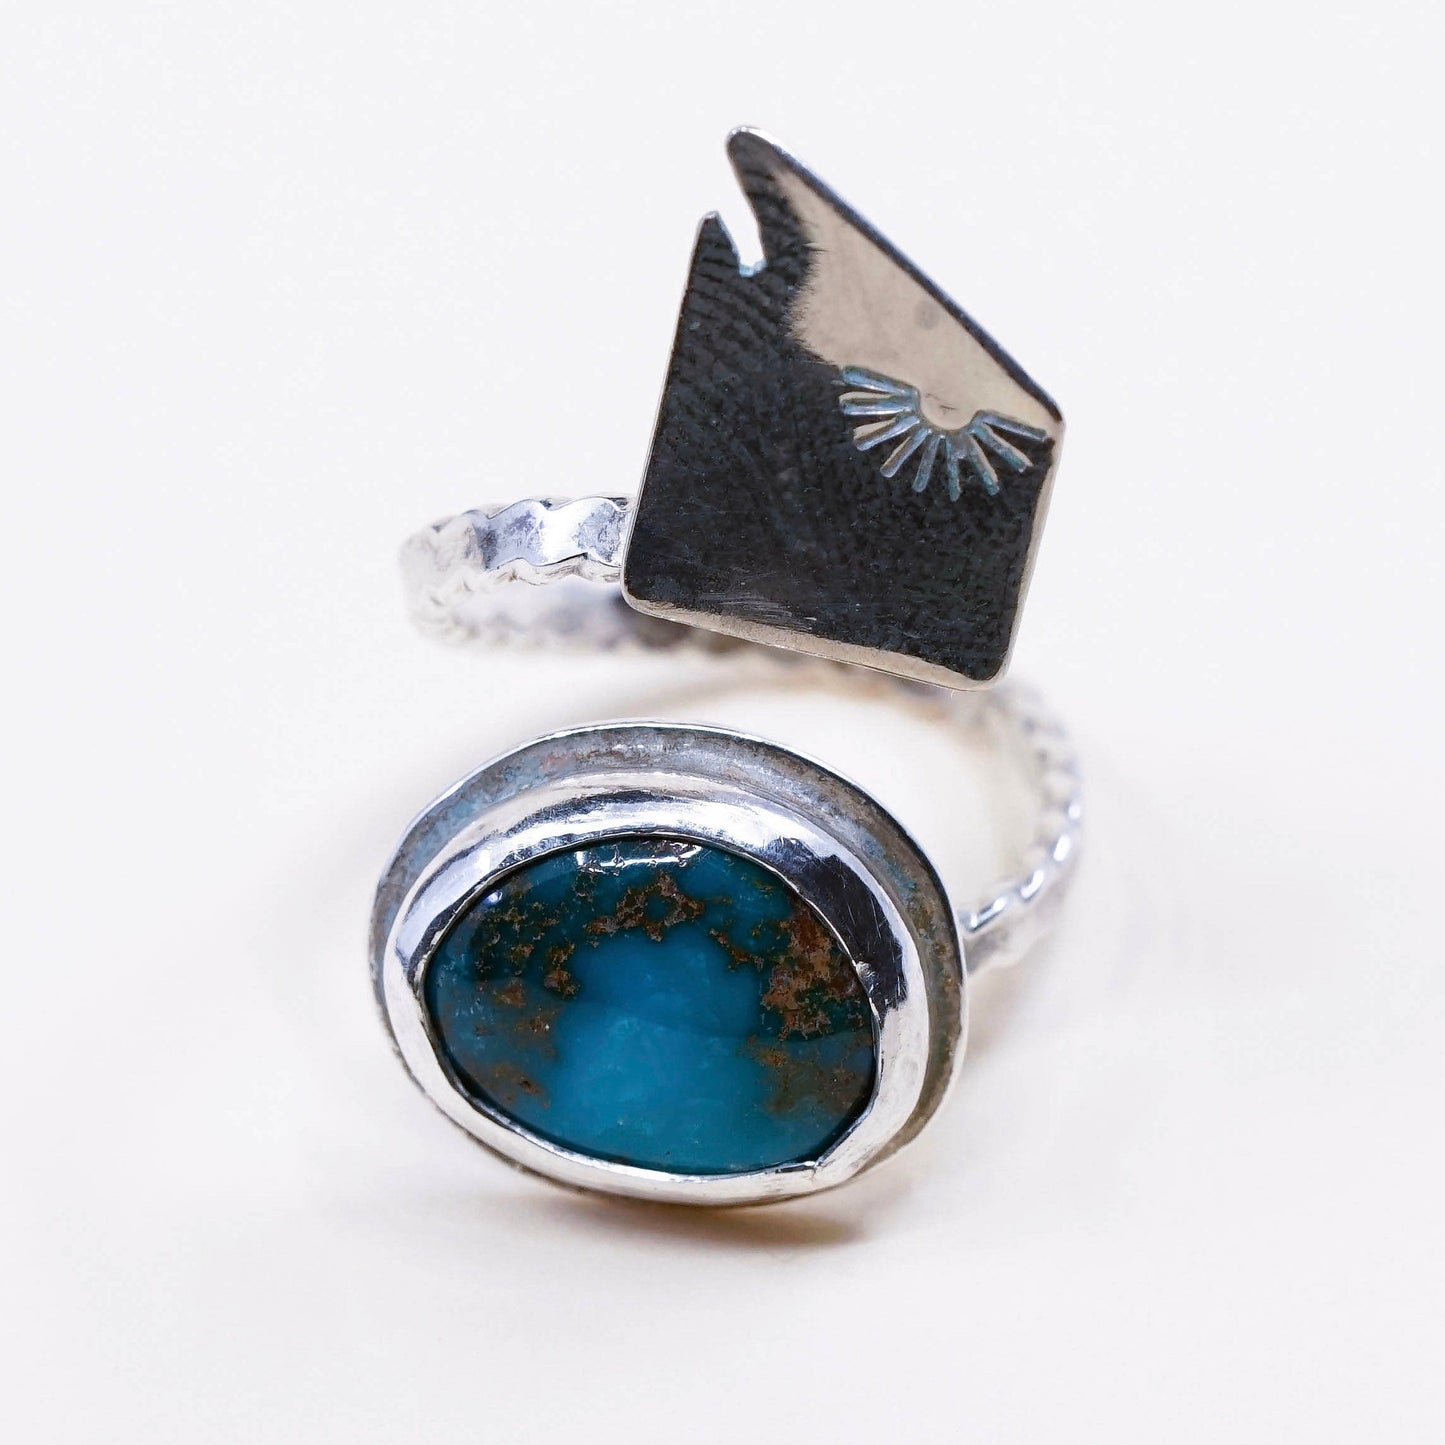 Native American sterling silver ring, handmade 925 wrap band w/ turquoise